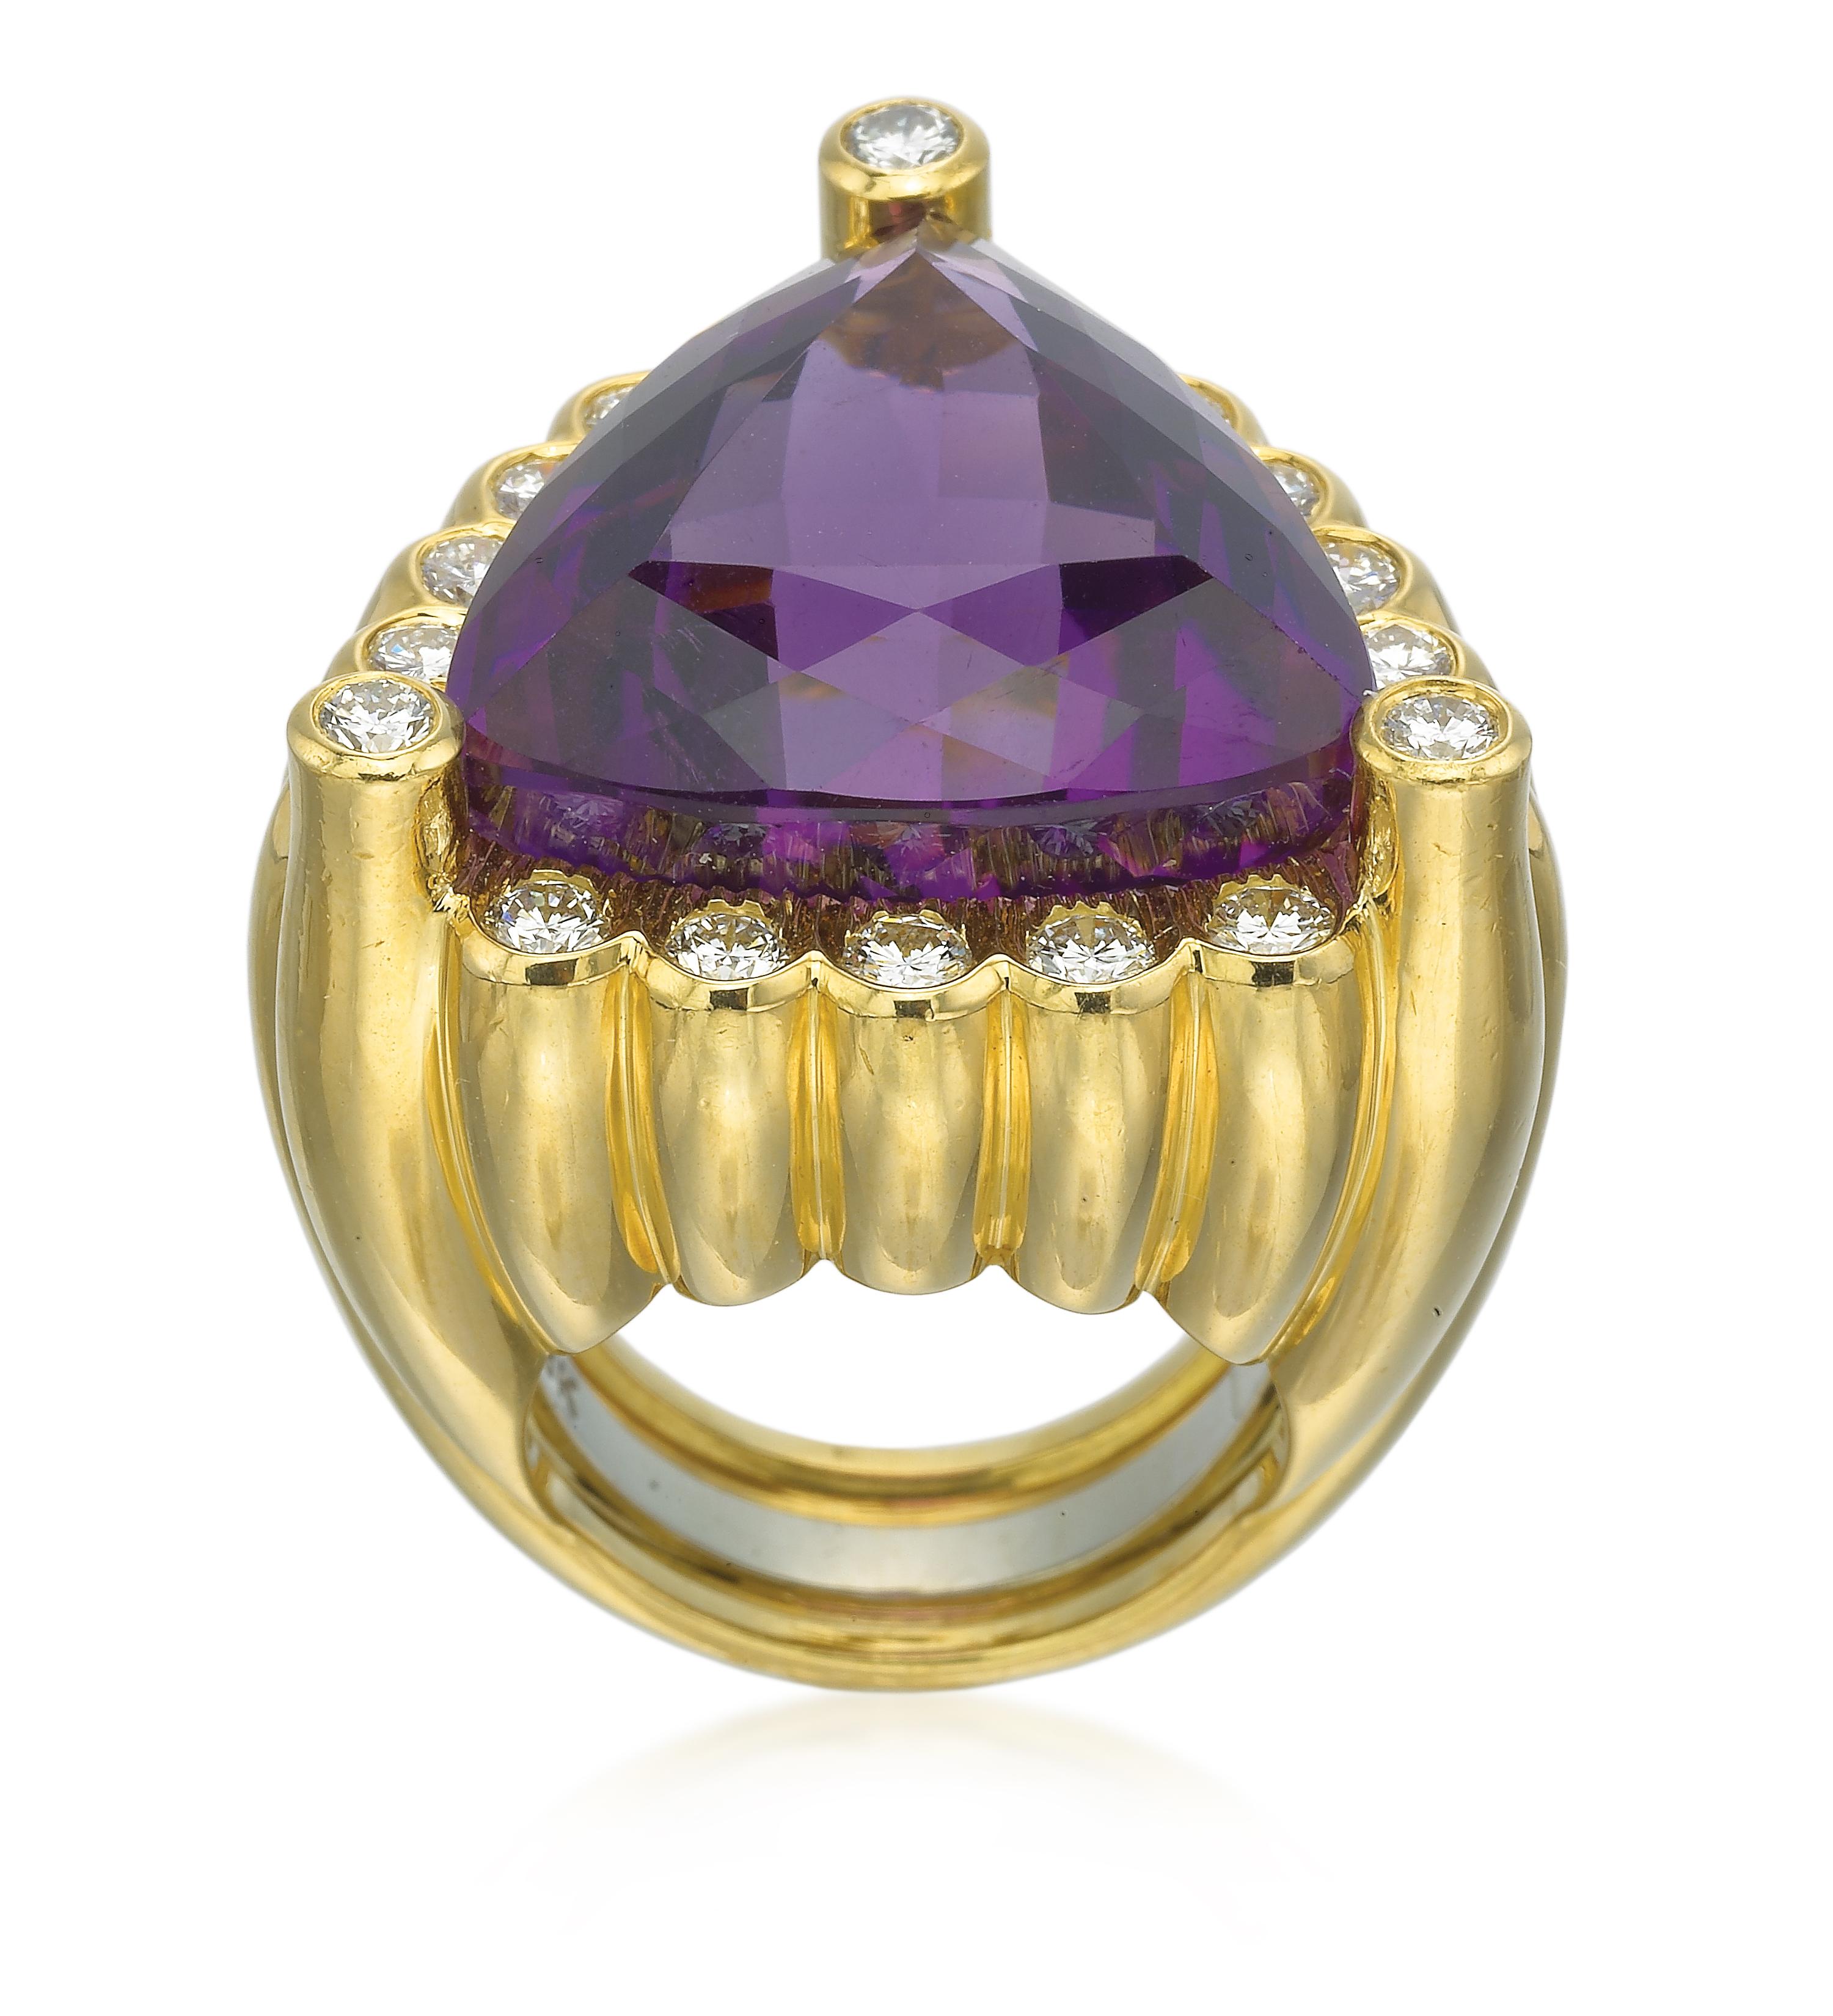 Exclusively from our  Estate collection, comes an original dynamic ring from David Webb. David Webb is the quintessential American jeweler of exceedingly modern jewelry. Driven by art, design and bold pieces this Amethyst ring embodies David Webb’s